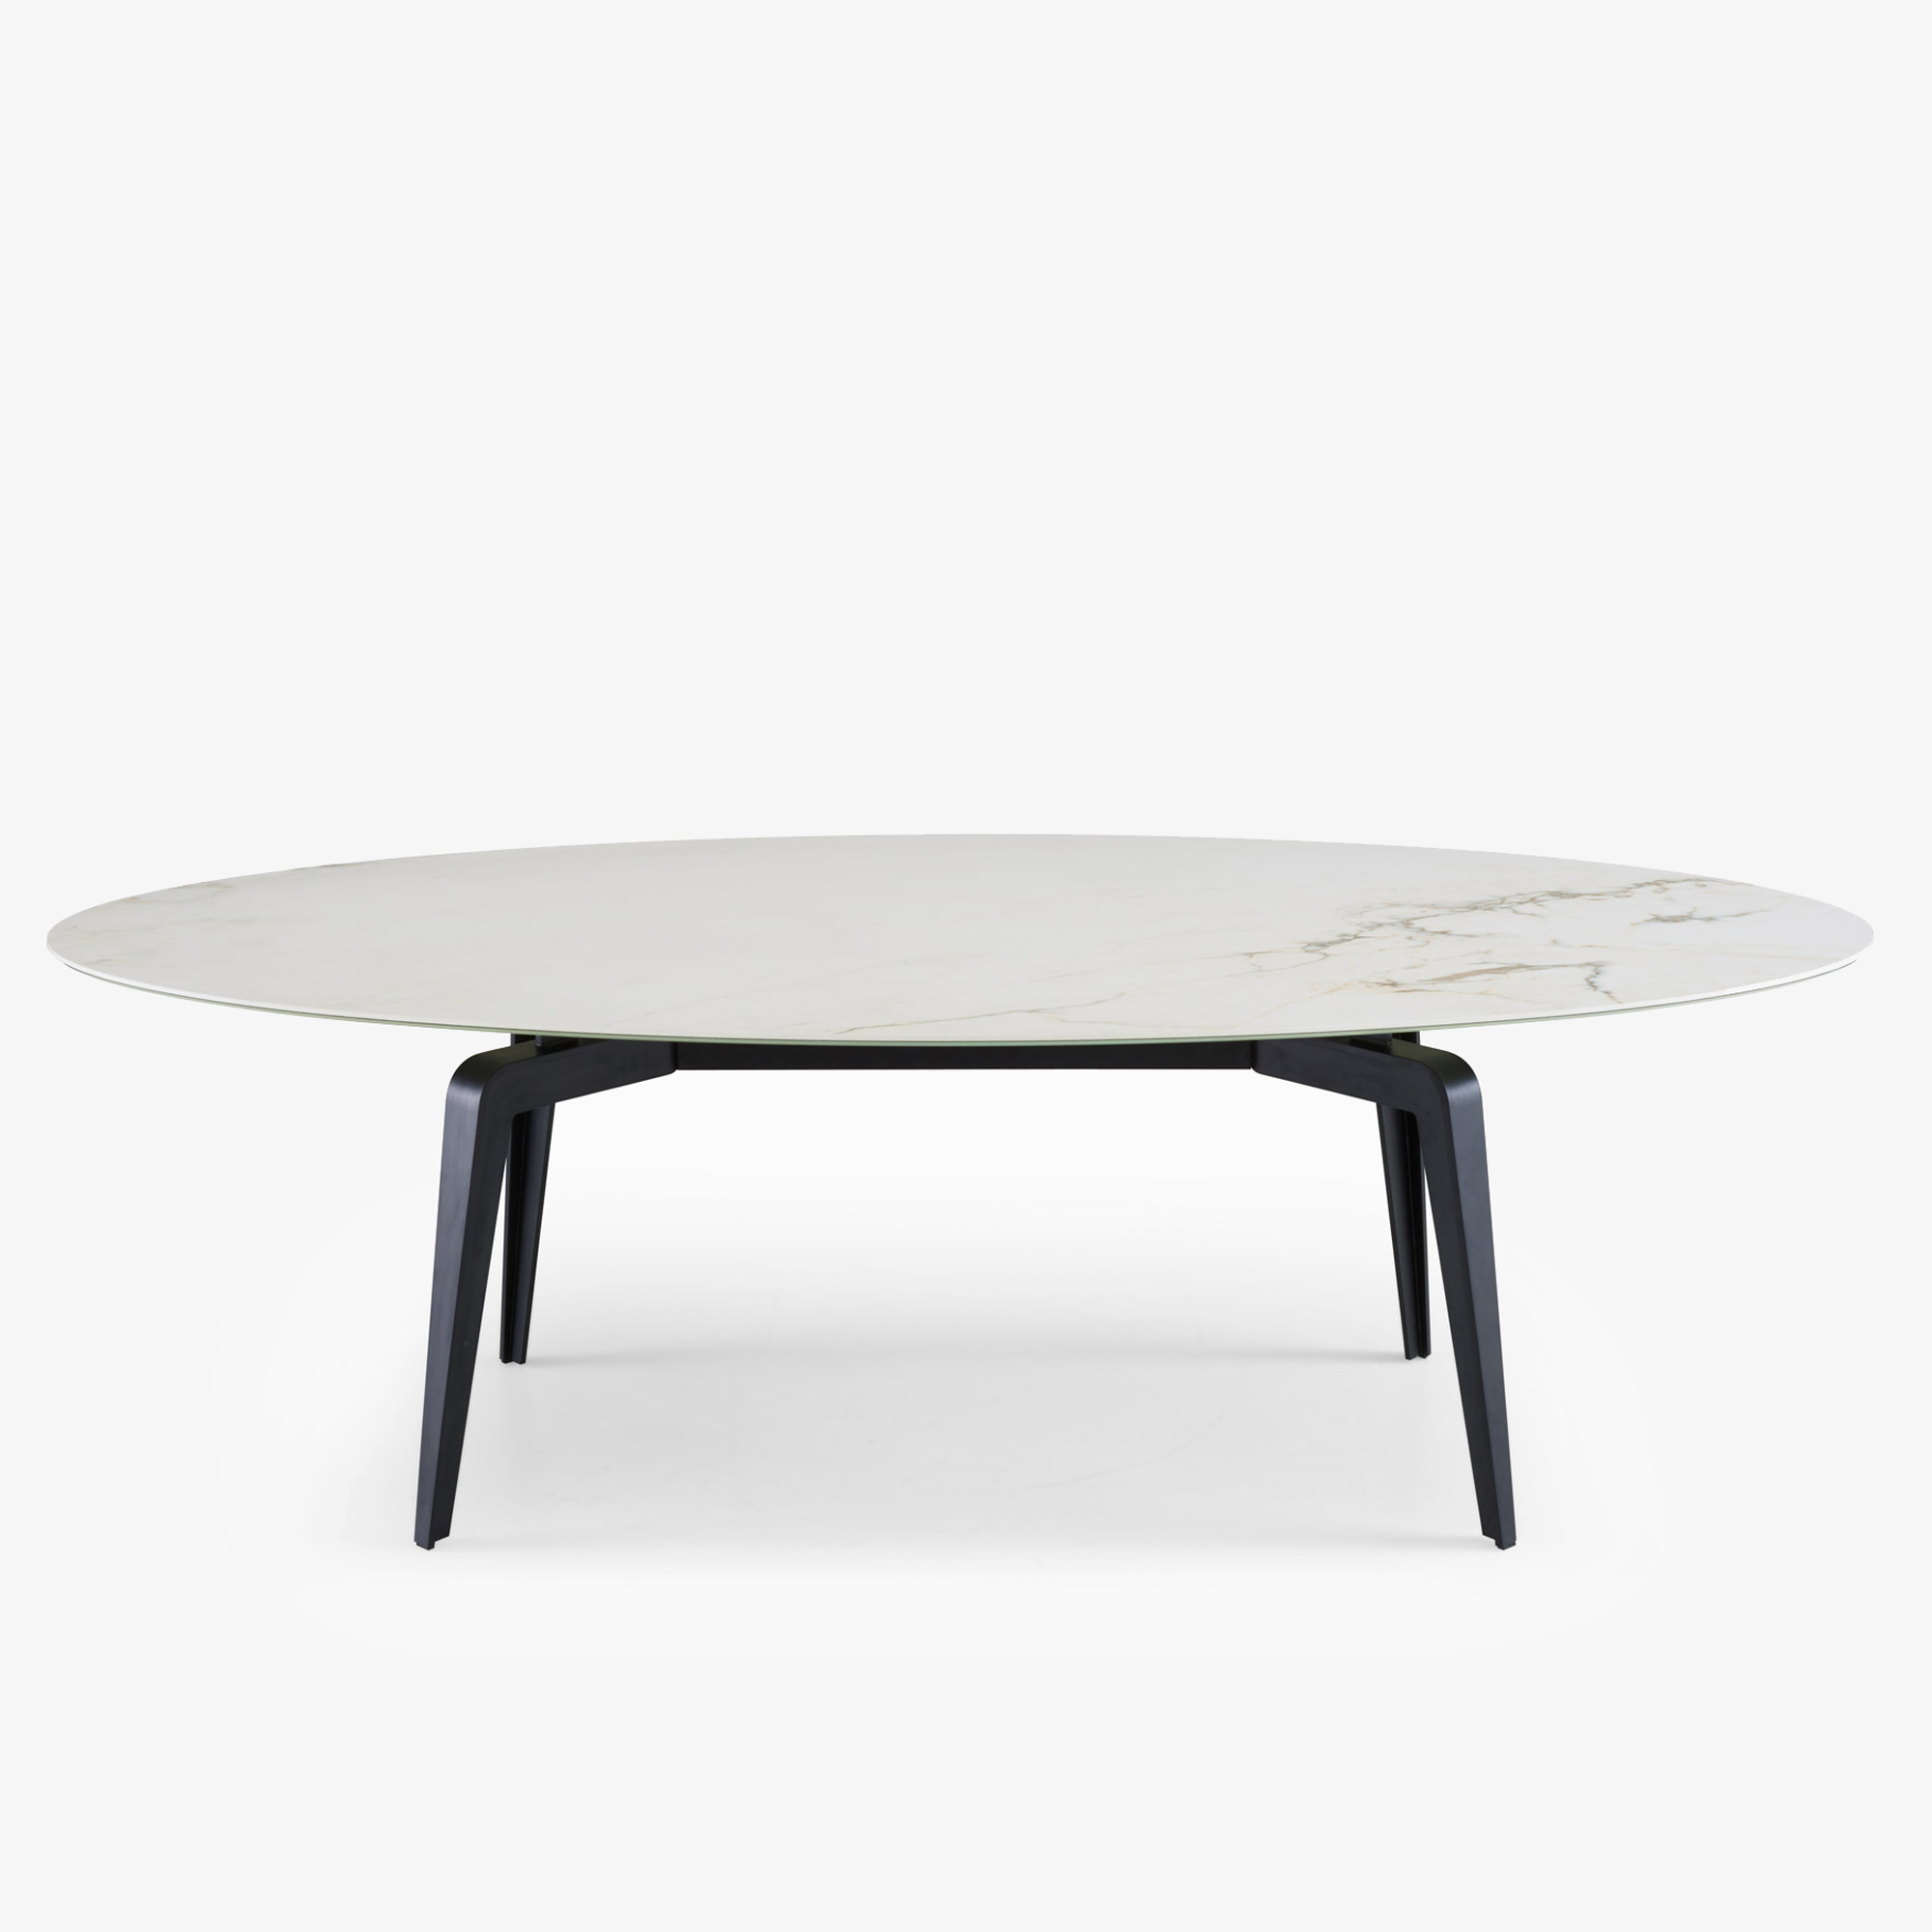 Image OVAL DINING TABLE BLACK LACQUERED BASE 